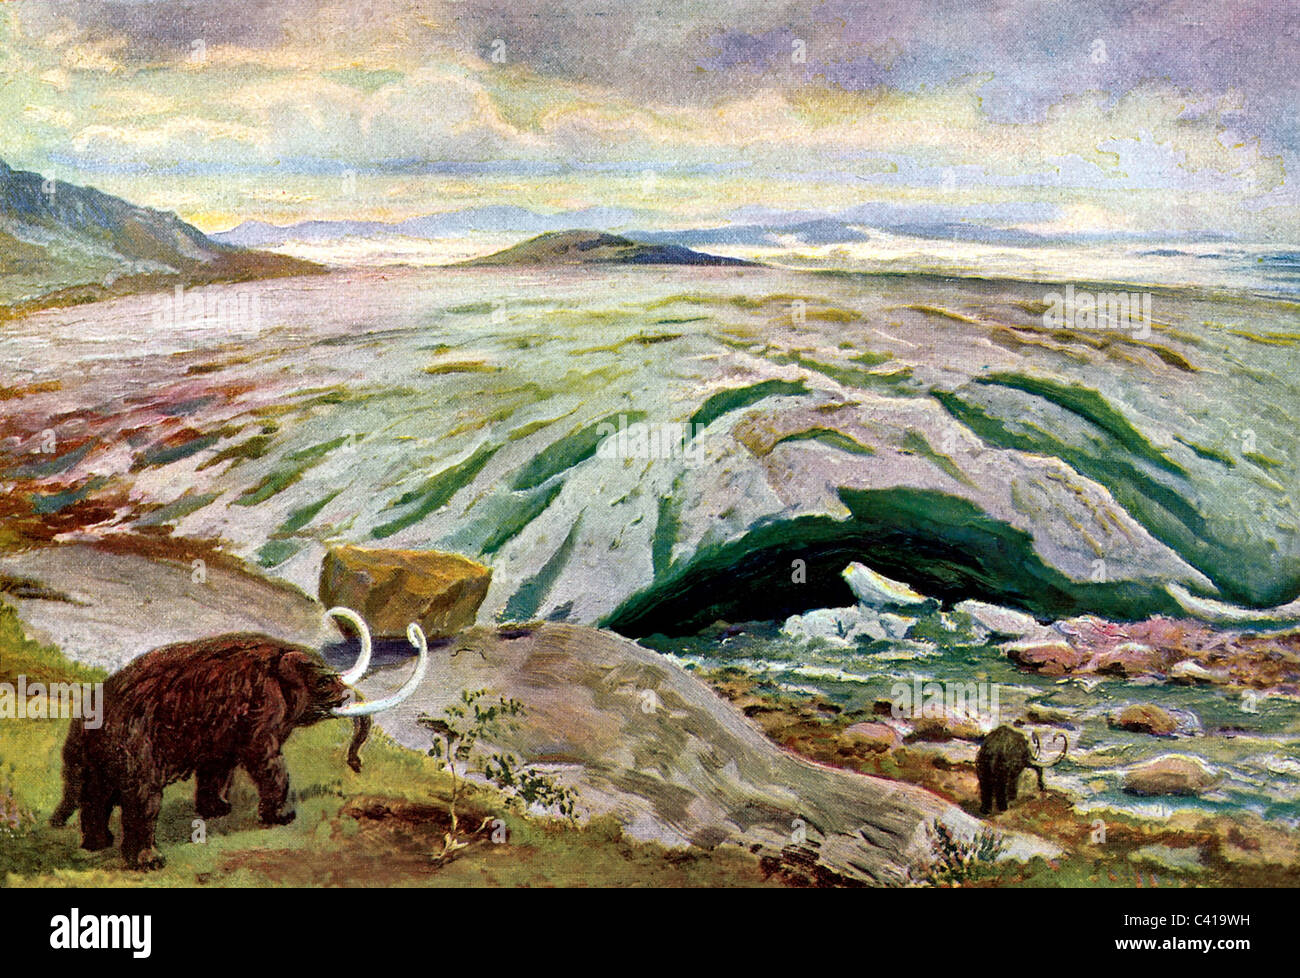 prehistory, landscape in ice age, mammoth, illustration by Wilhelm Kranz, circa 1920, Additional-Rights-Clearences-Not Available Stock Photo